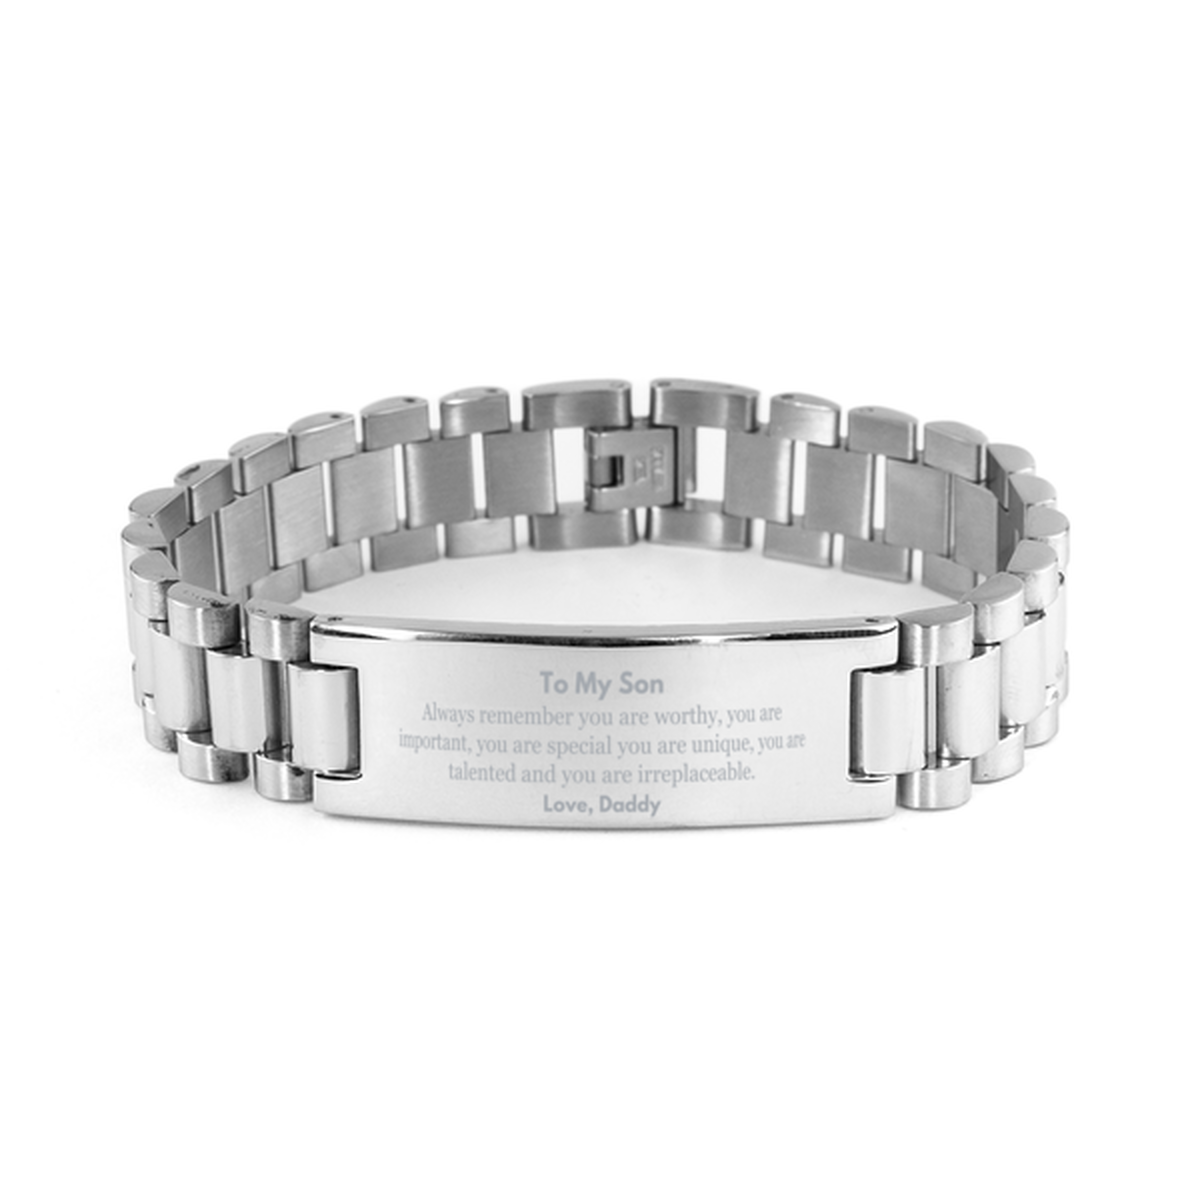 Son Birthday Gifts from Daddy, Inspirational Ladder Stainless Steel Bracelet for Son Christmas Graduation Gifts for Son Always remember you are worthy, you are important. Love, Daddy